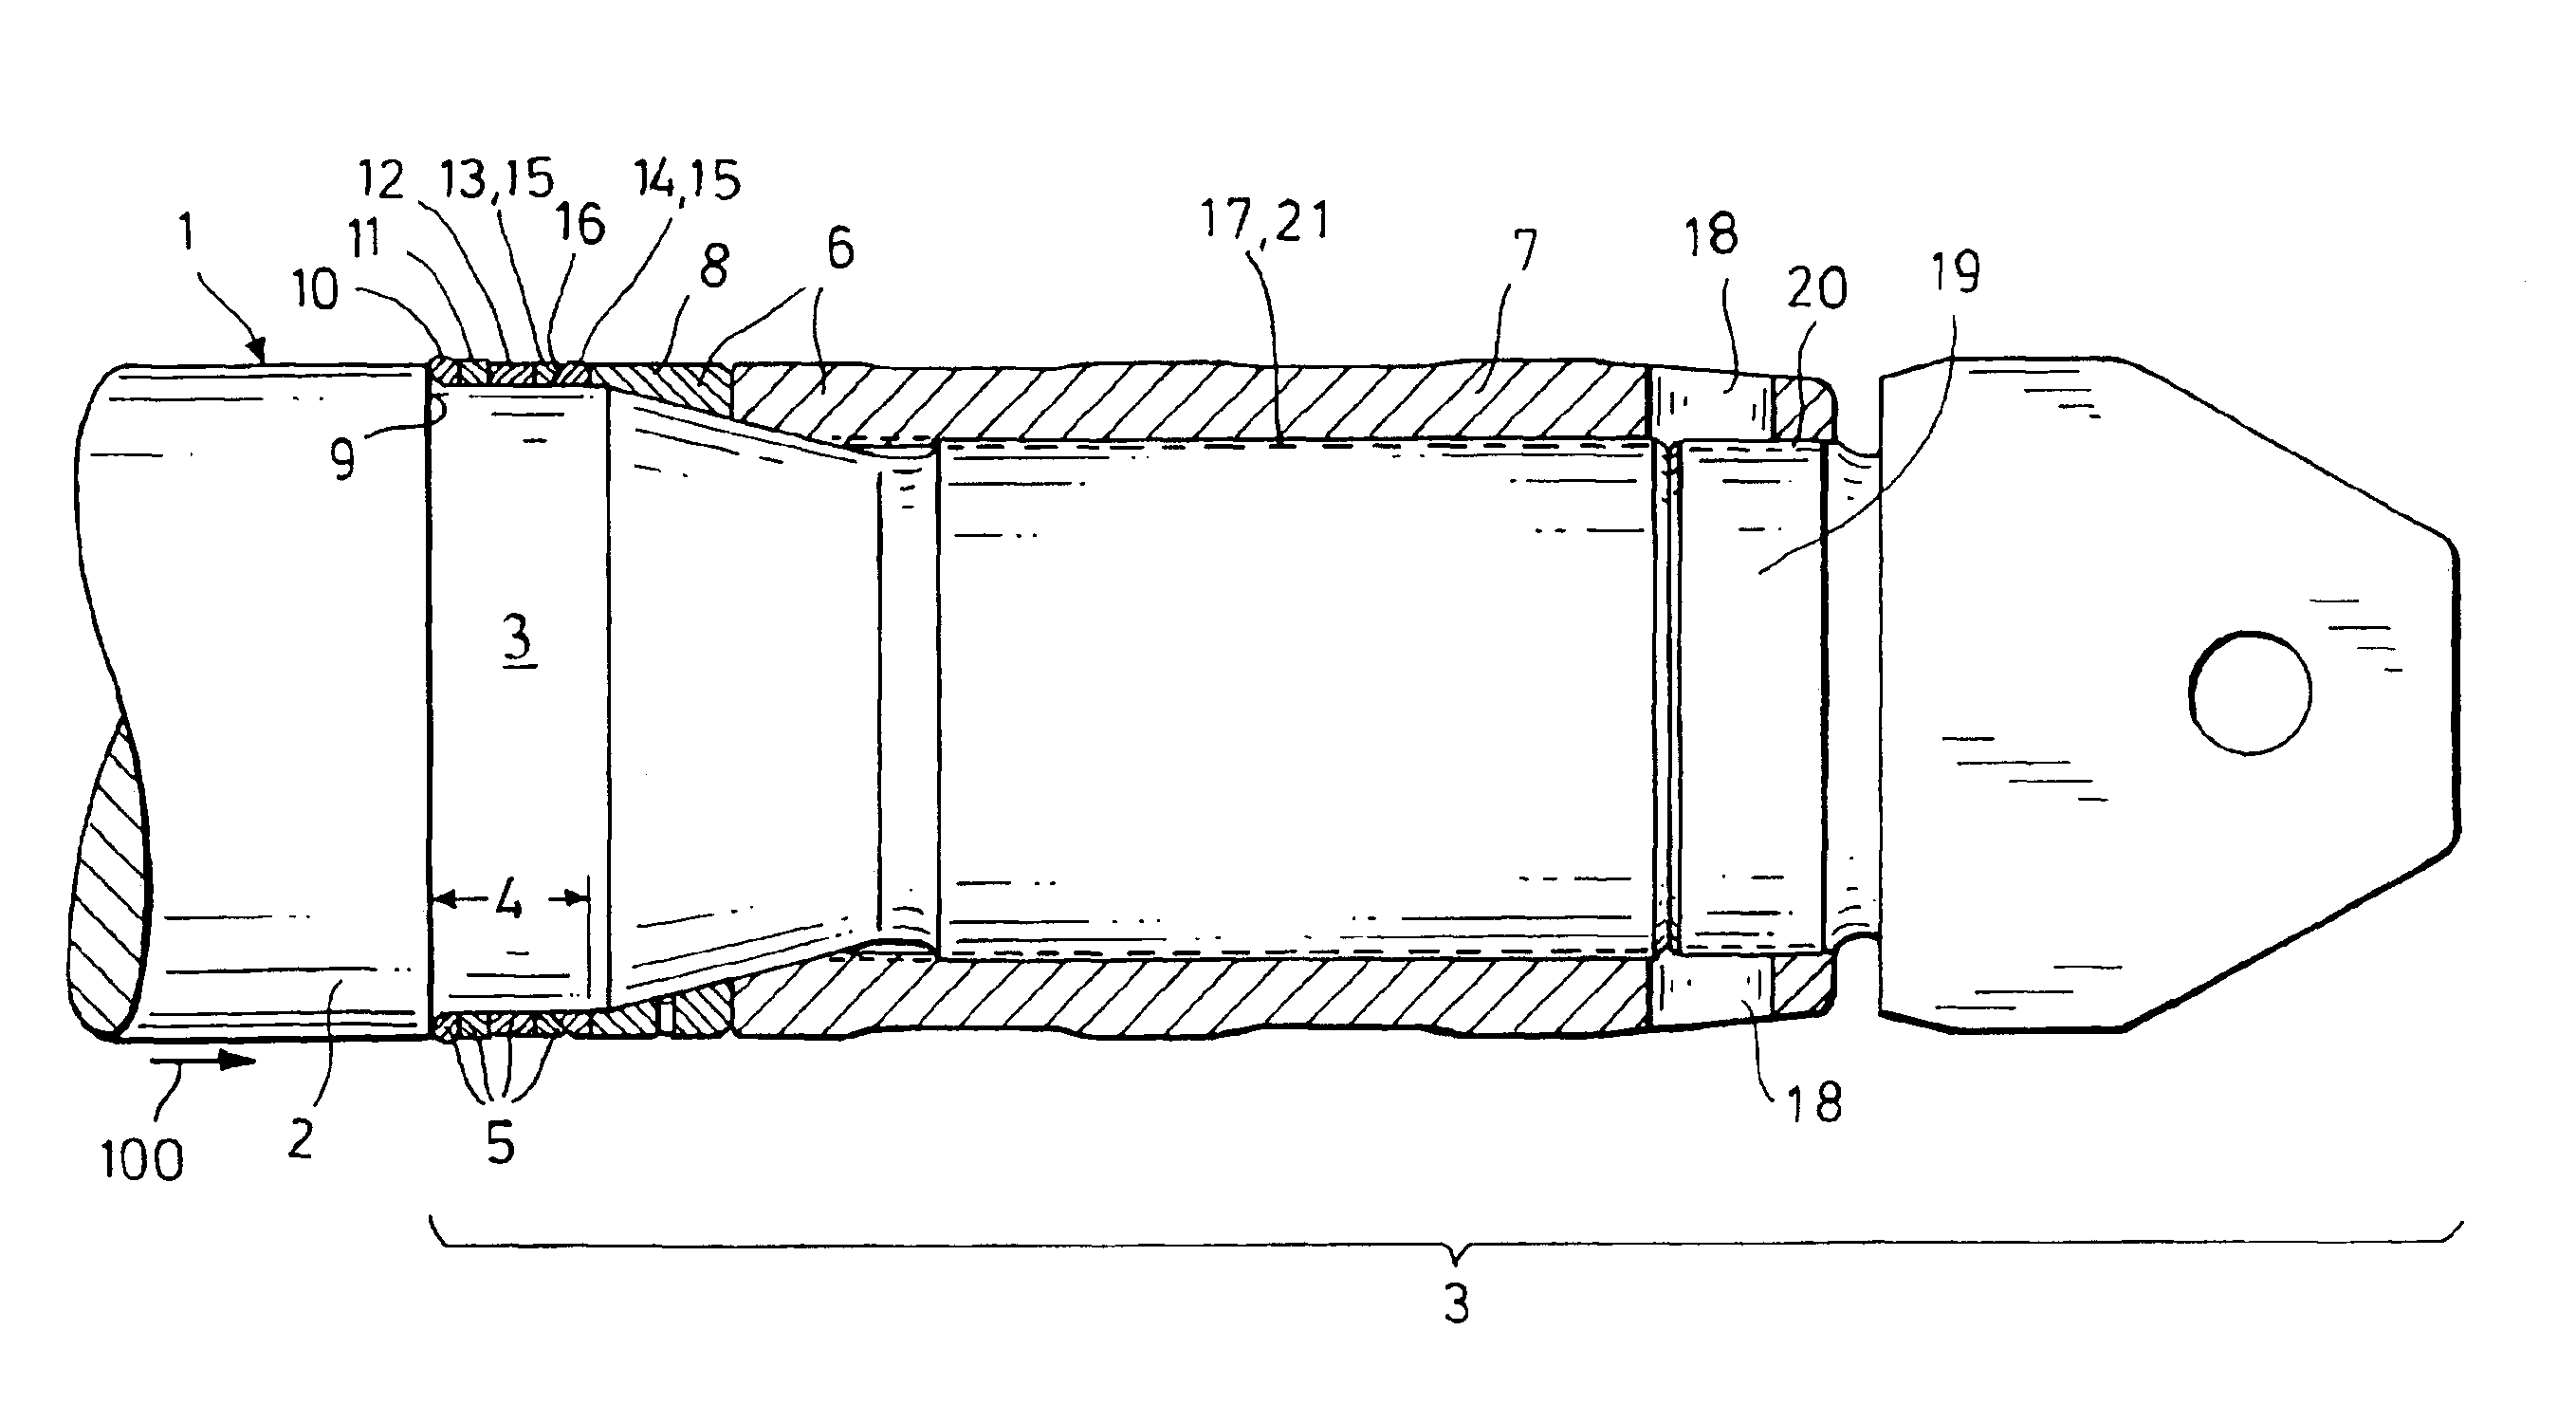 Apparatus for the section-wise autofrettage of gun barrels